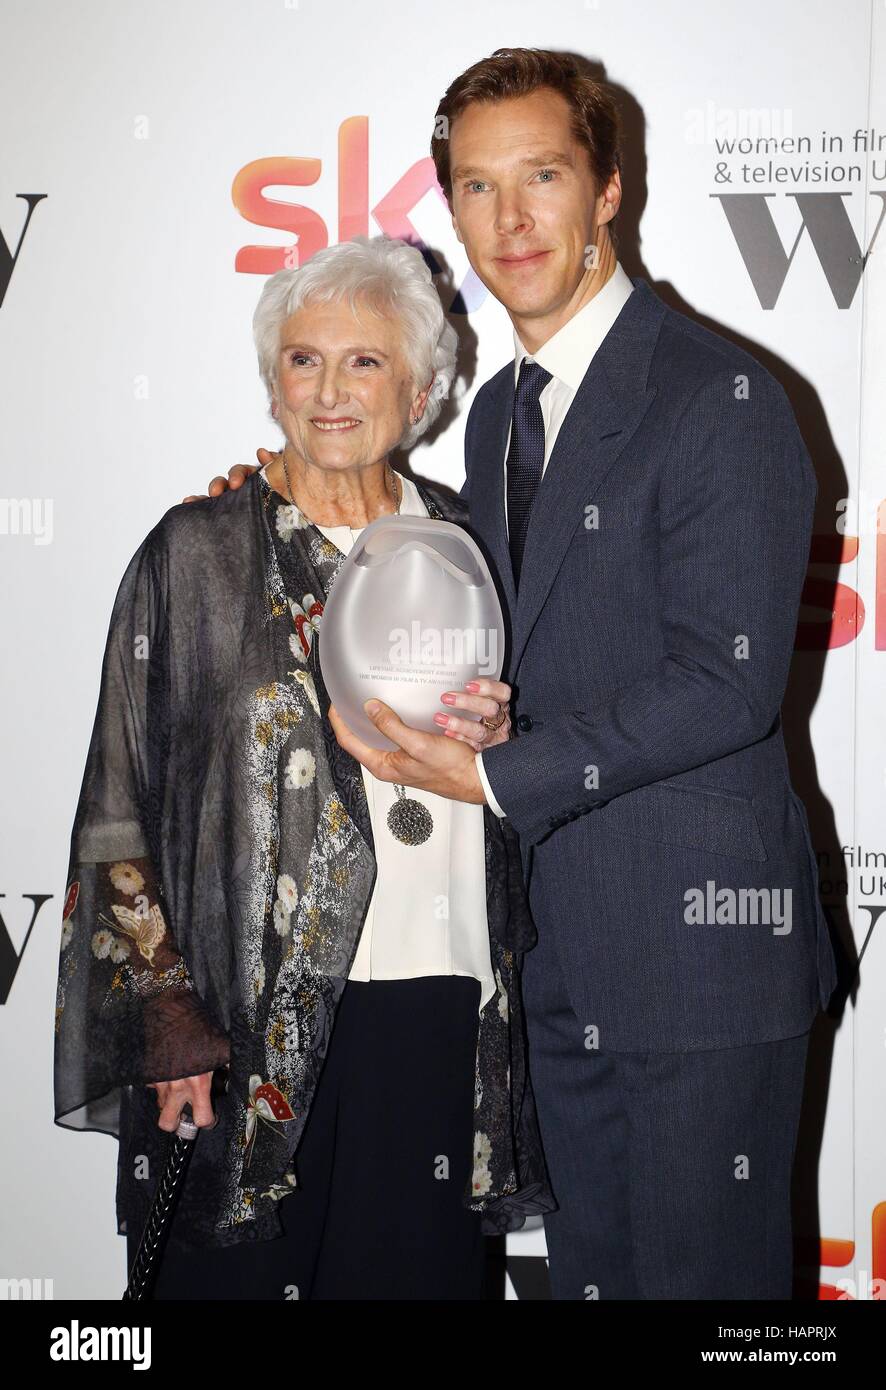 Benedict Cumberbatch presented Beryl Vertue with the EON Productions lifetime achievement award at the Women in Film & TV Awards at the Hilton hotel in central London. Stock Photo